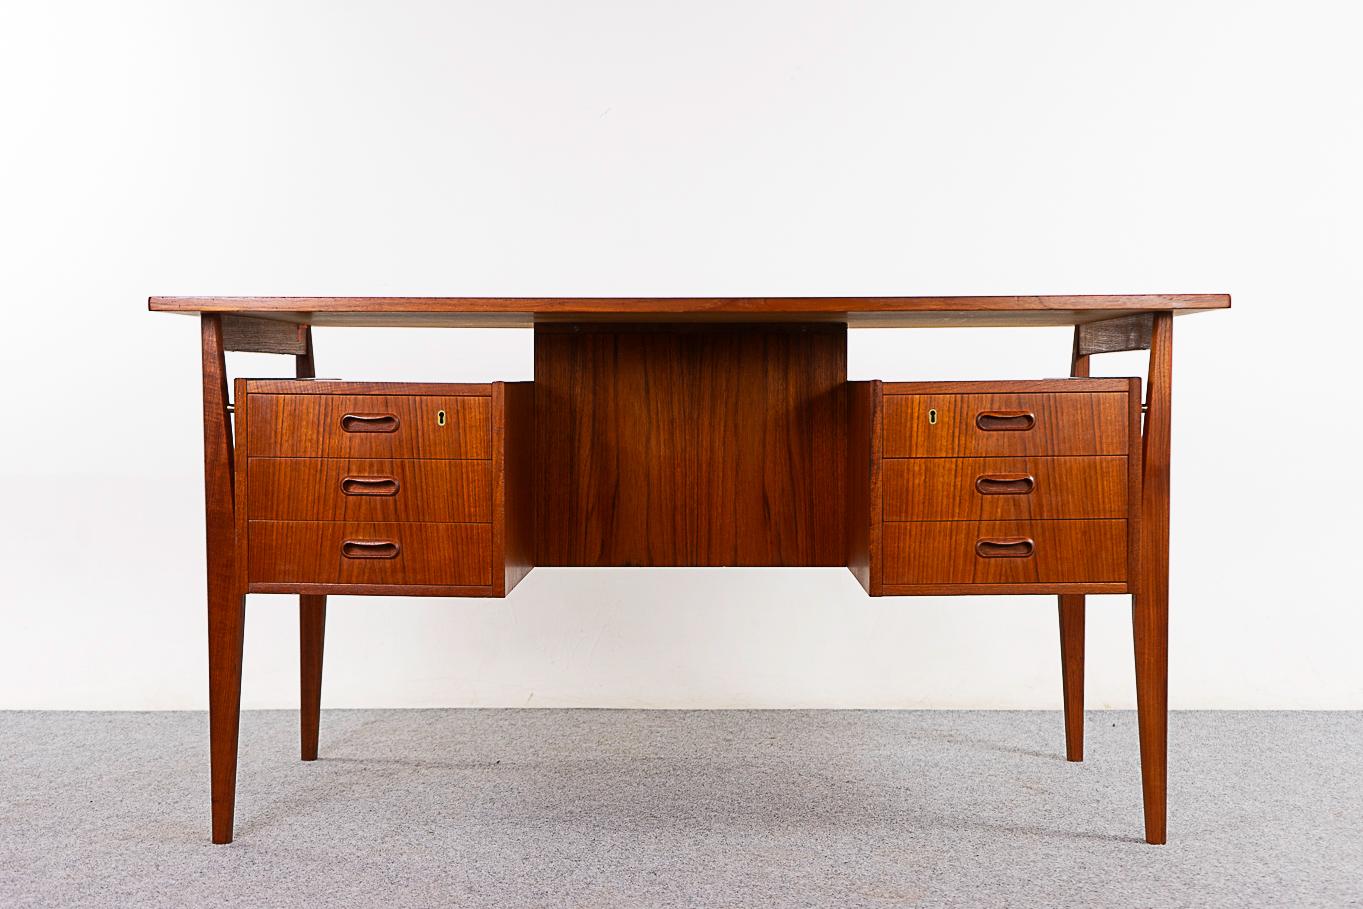 Teak mid-century desk, circa 1960's. Floating top with dual drawers and  finished back with shelf. Angular solid teak frame and beautifully bookmatched veneer throughout.

Unrestored item with option to purchase in restored condition for an